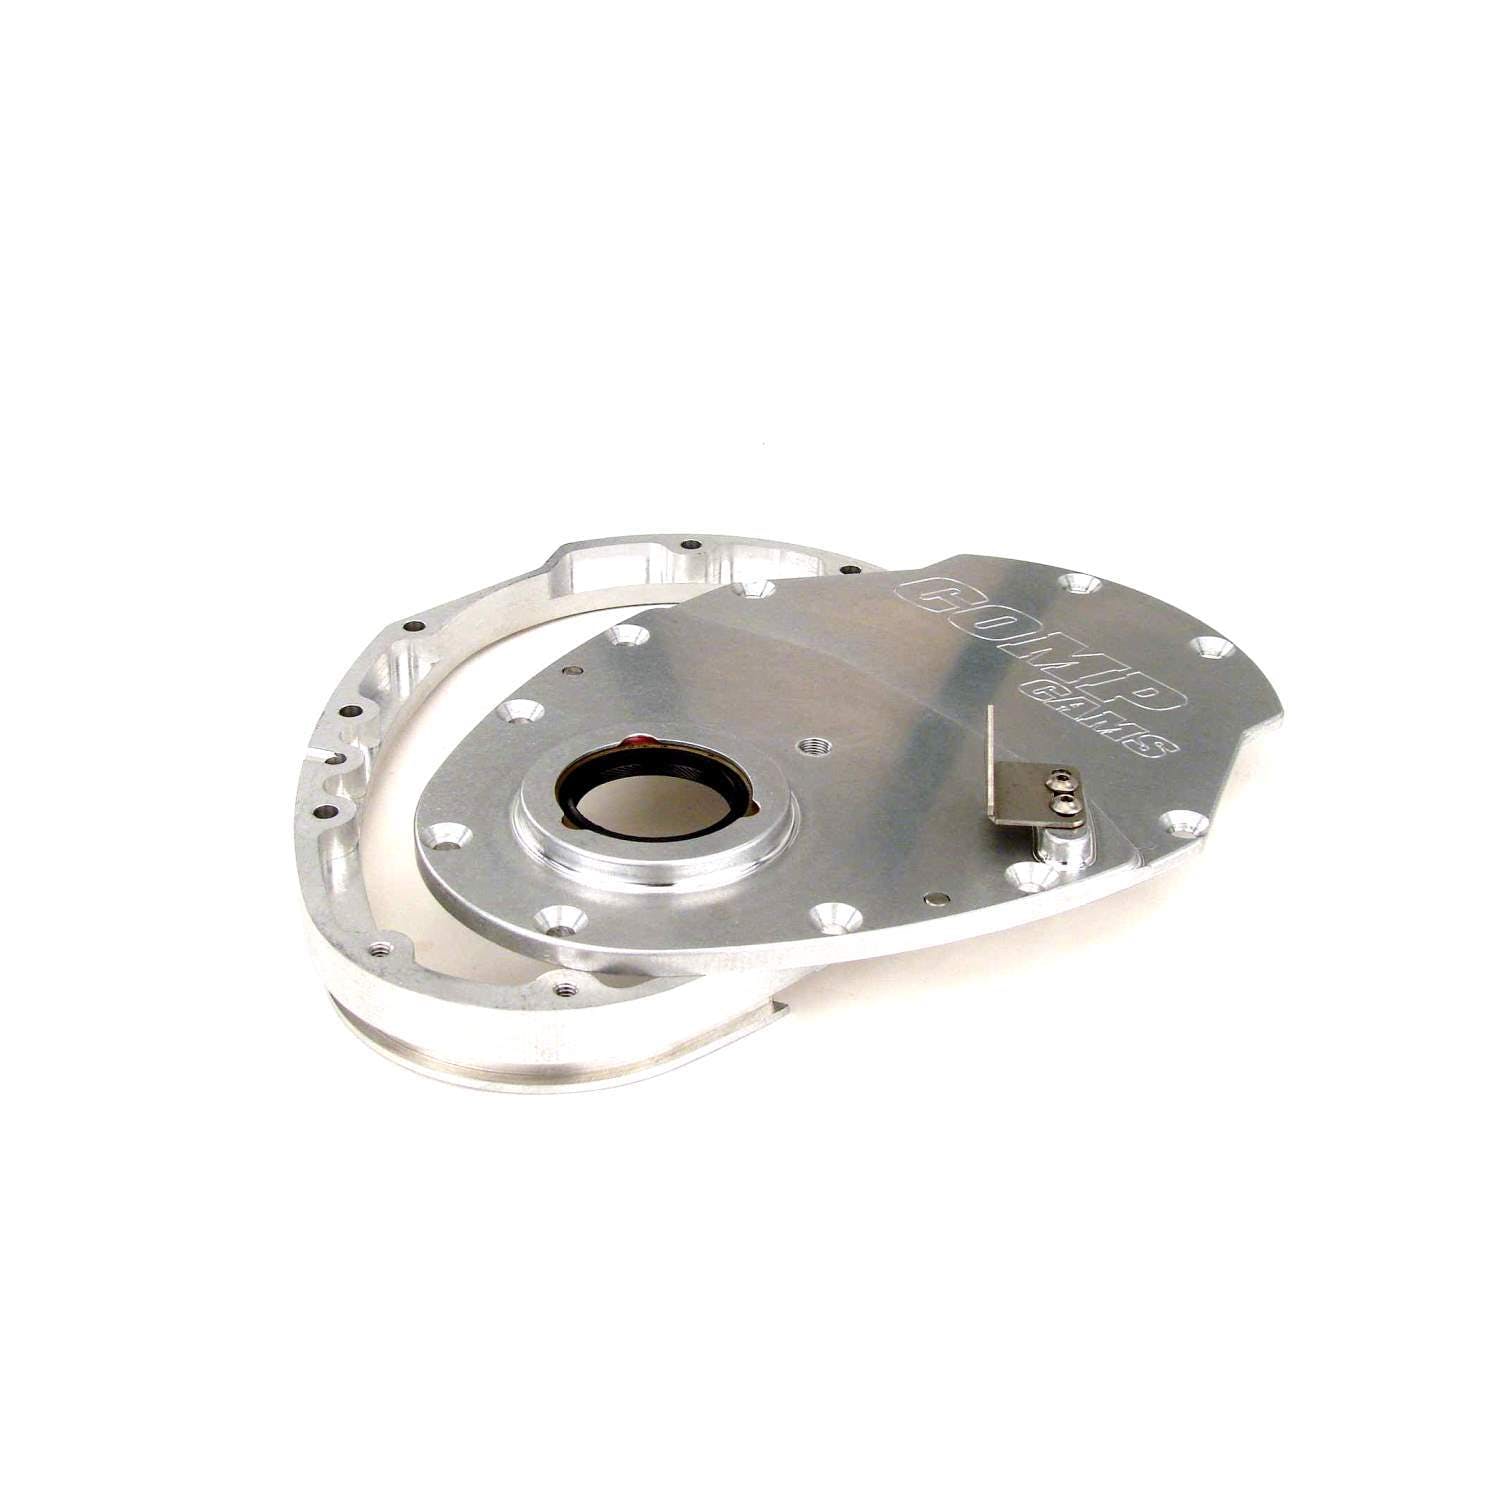 Competition Cams 212 Billet Aluminum Timing Cover